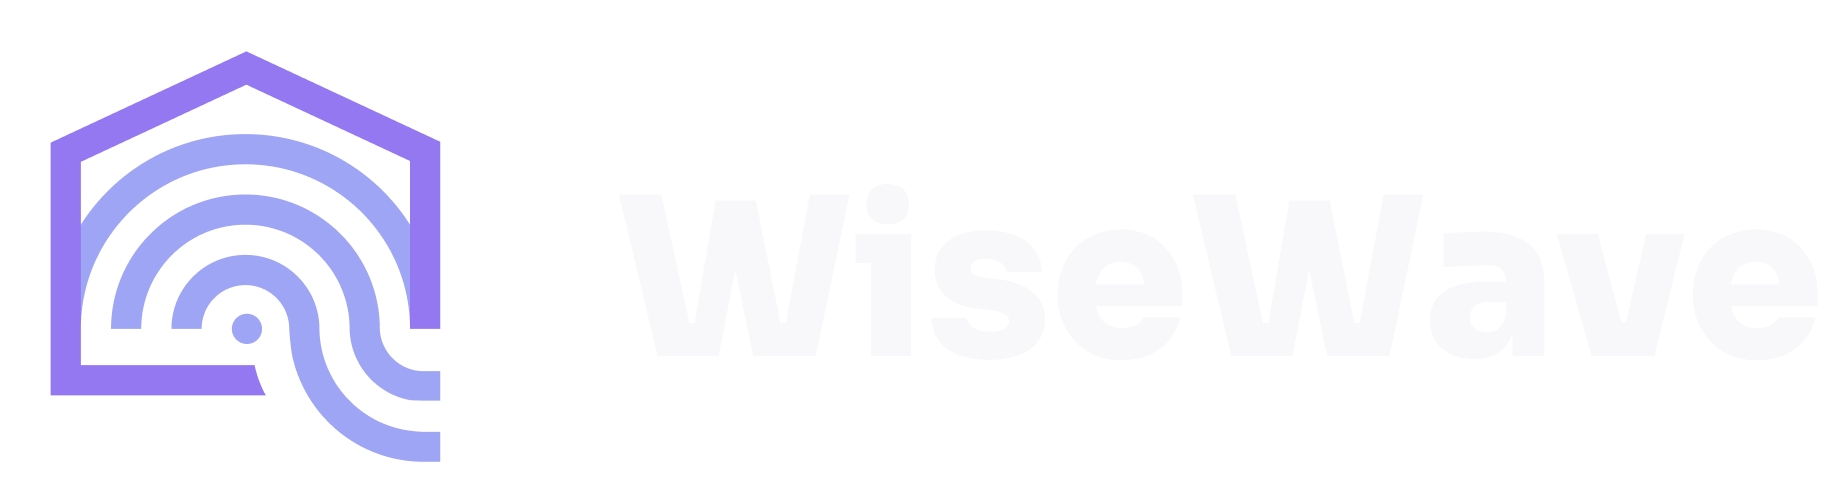 WiseWave logo and name